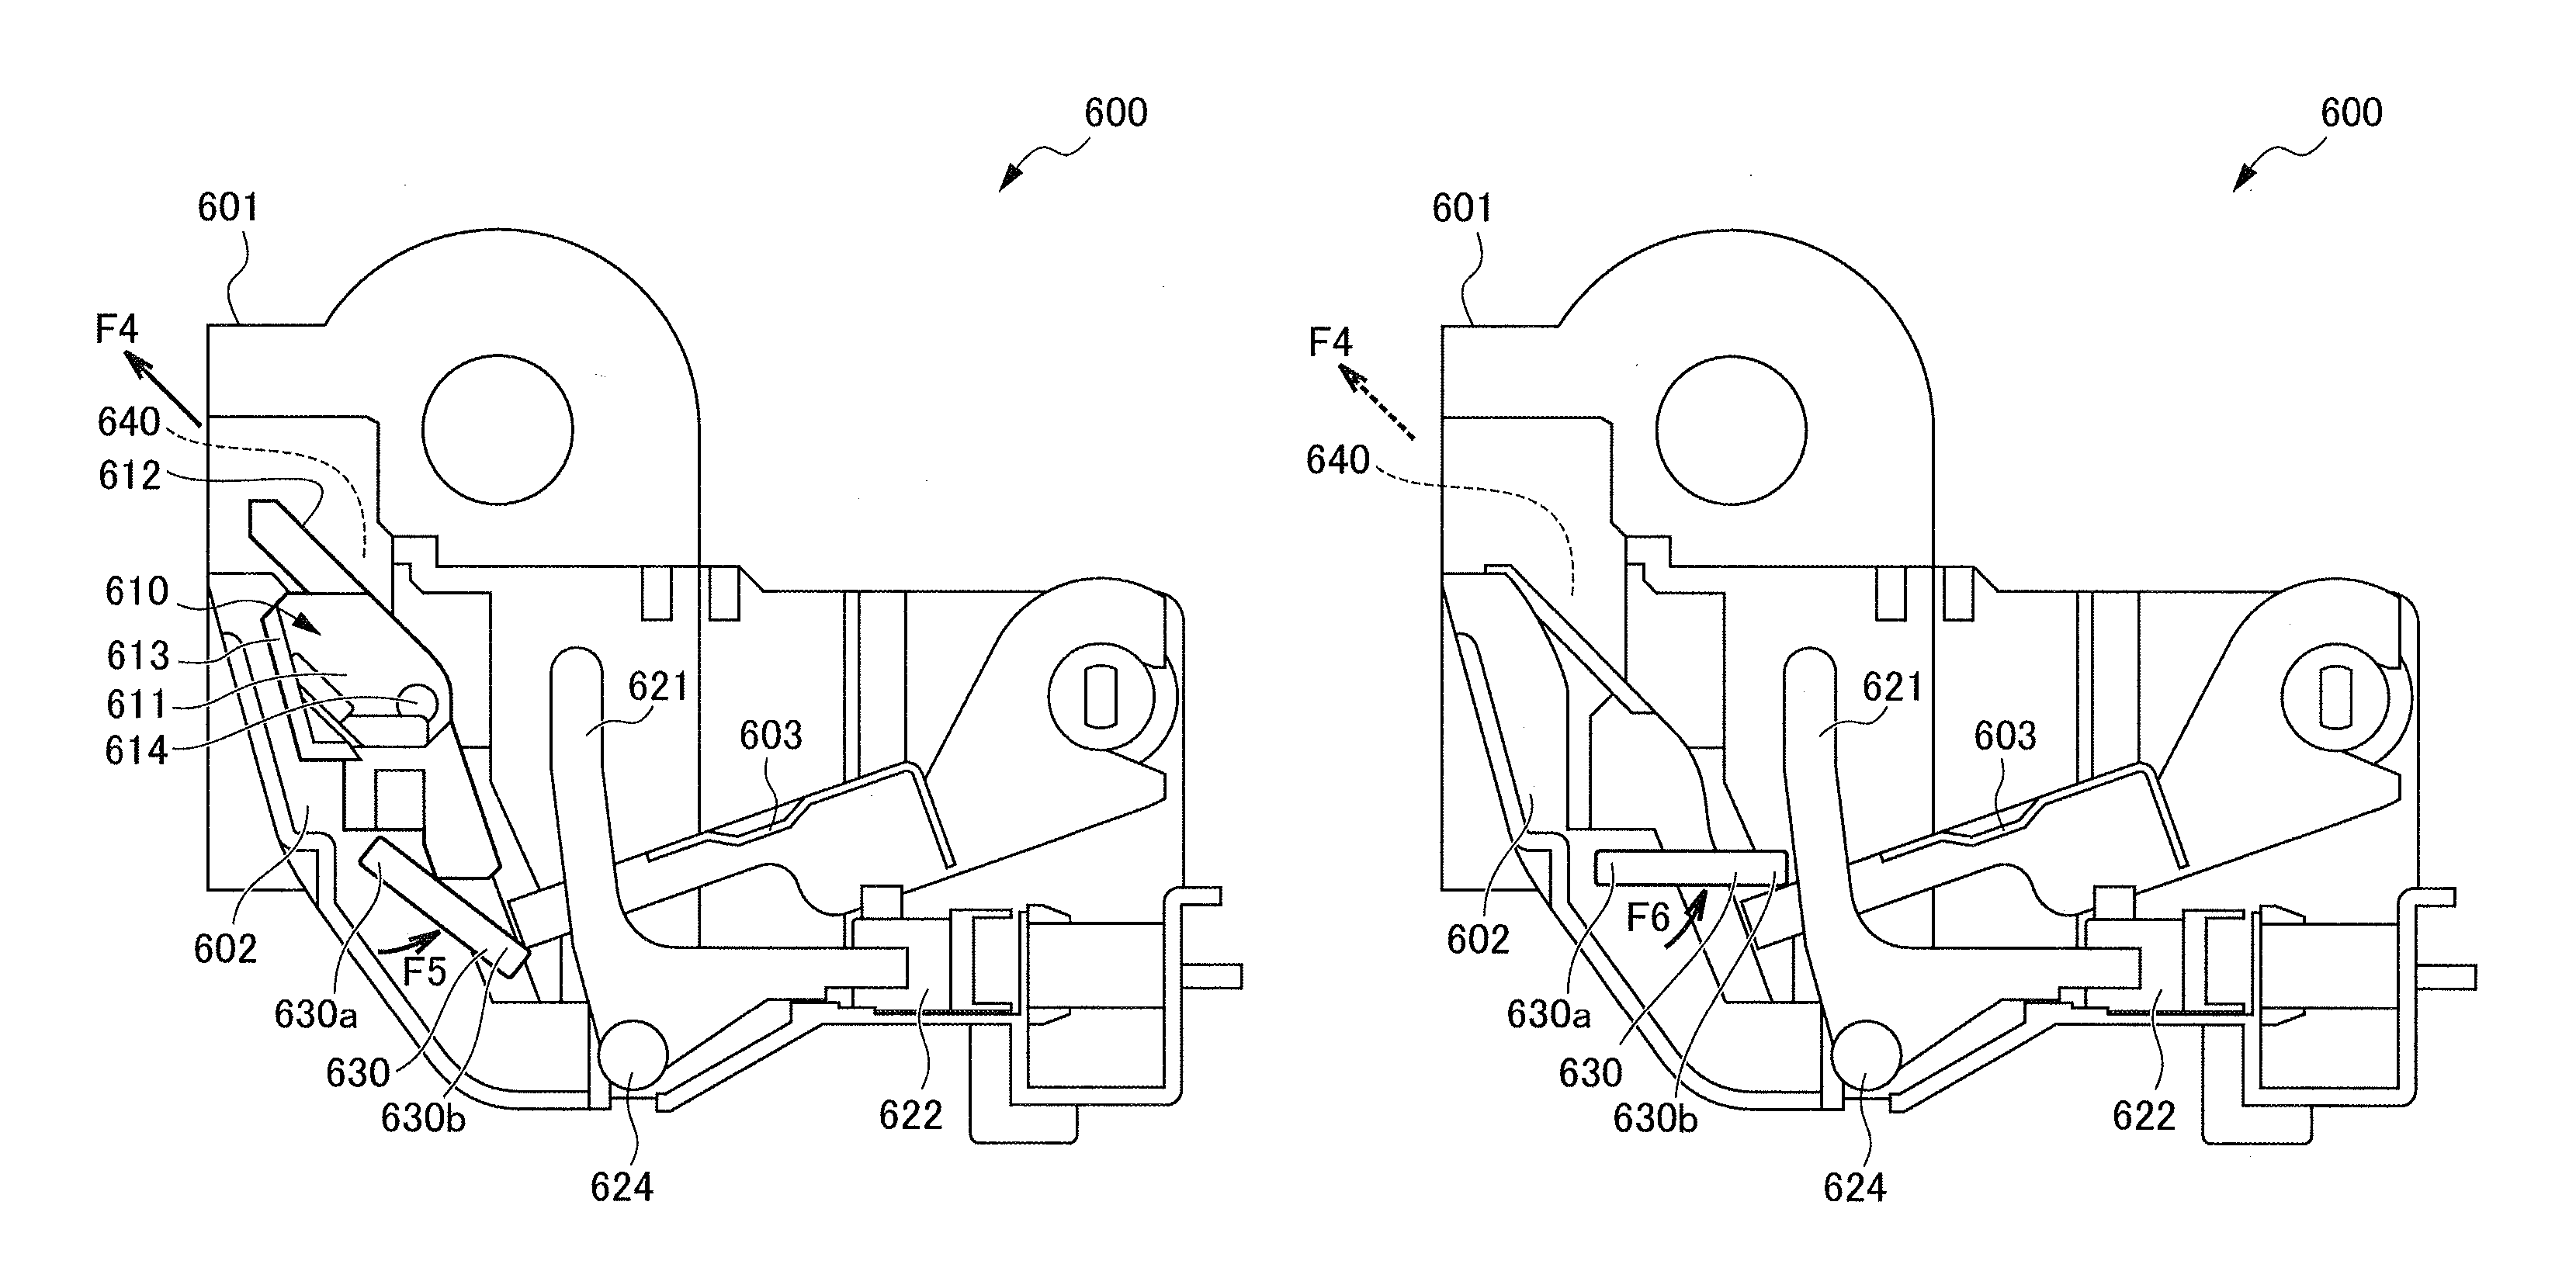 Image forming apparatus and feed mechanism